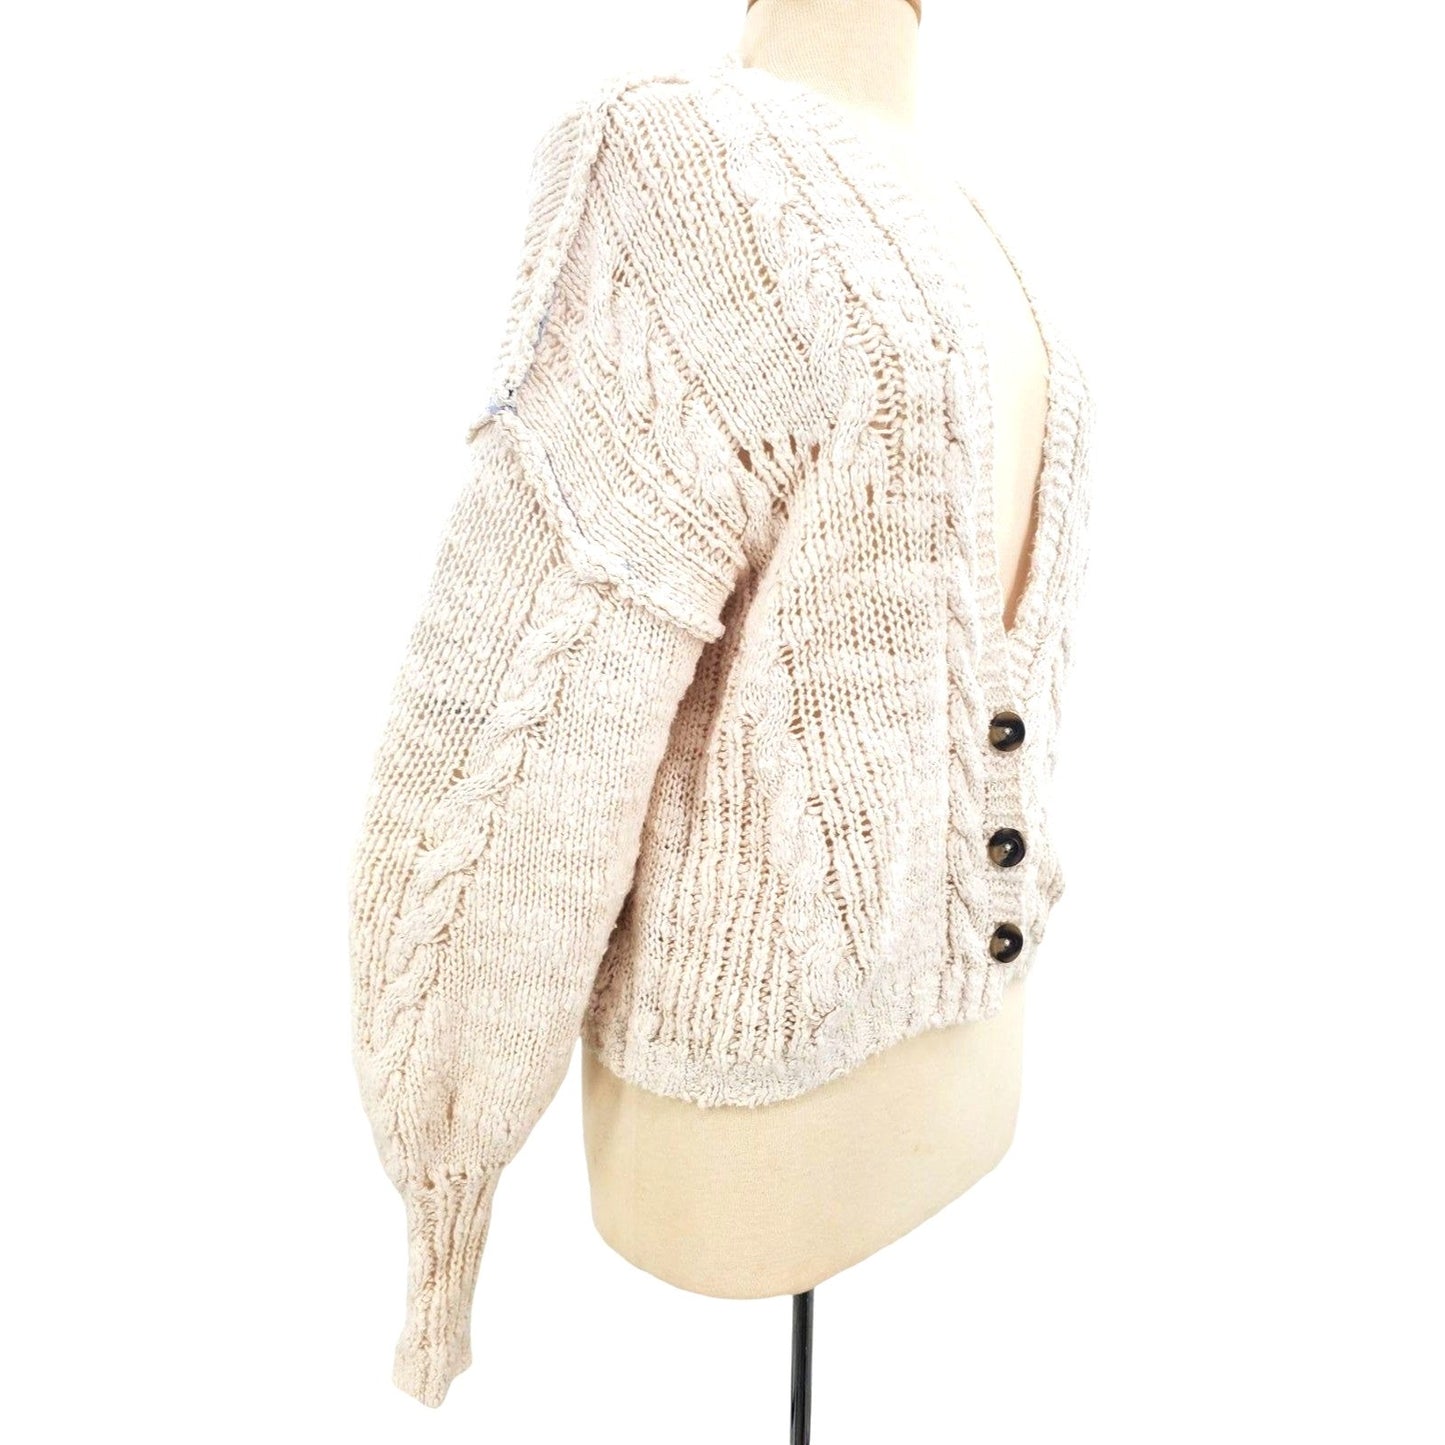 FREE PEOPLE Sandstorm CARDIGAN in IVORY MOON with OCEAN knit Sweater